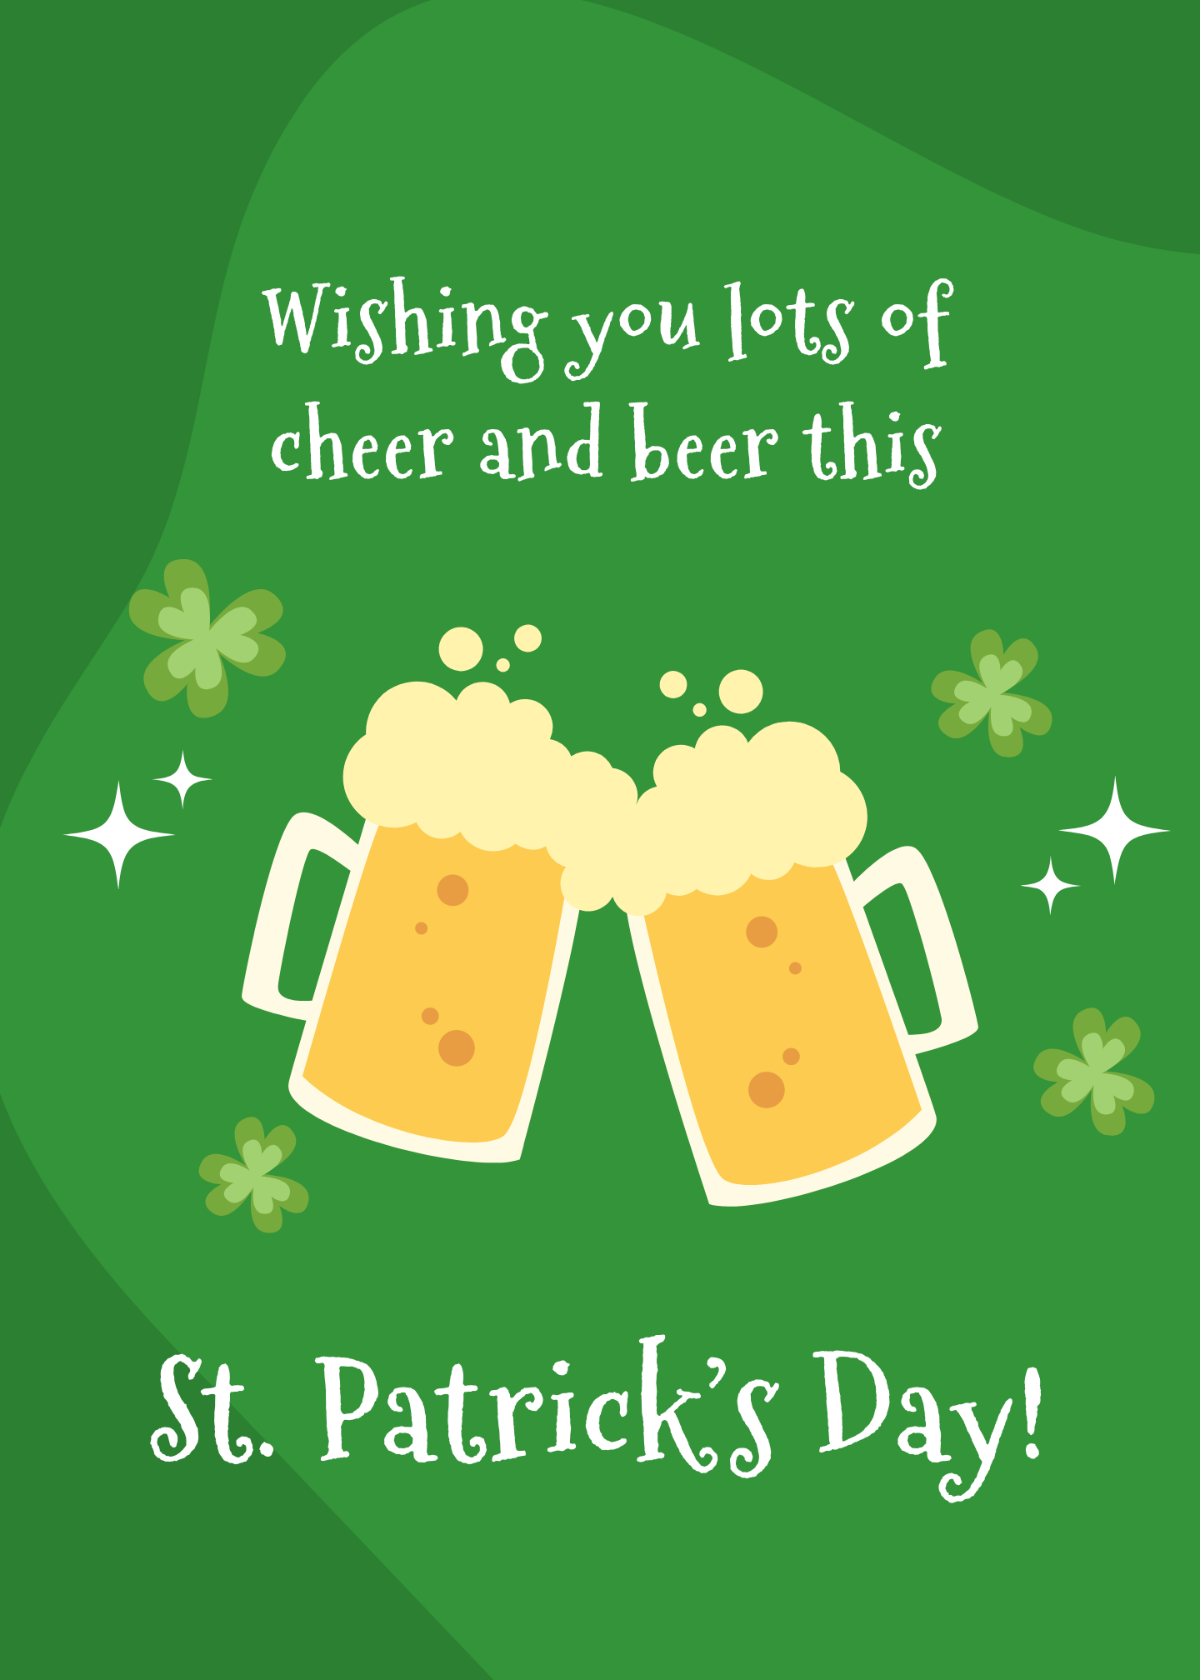 St. Patrick's Day Card Template